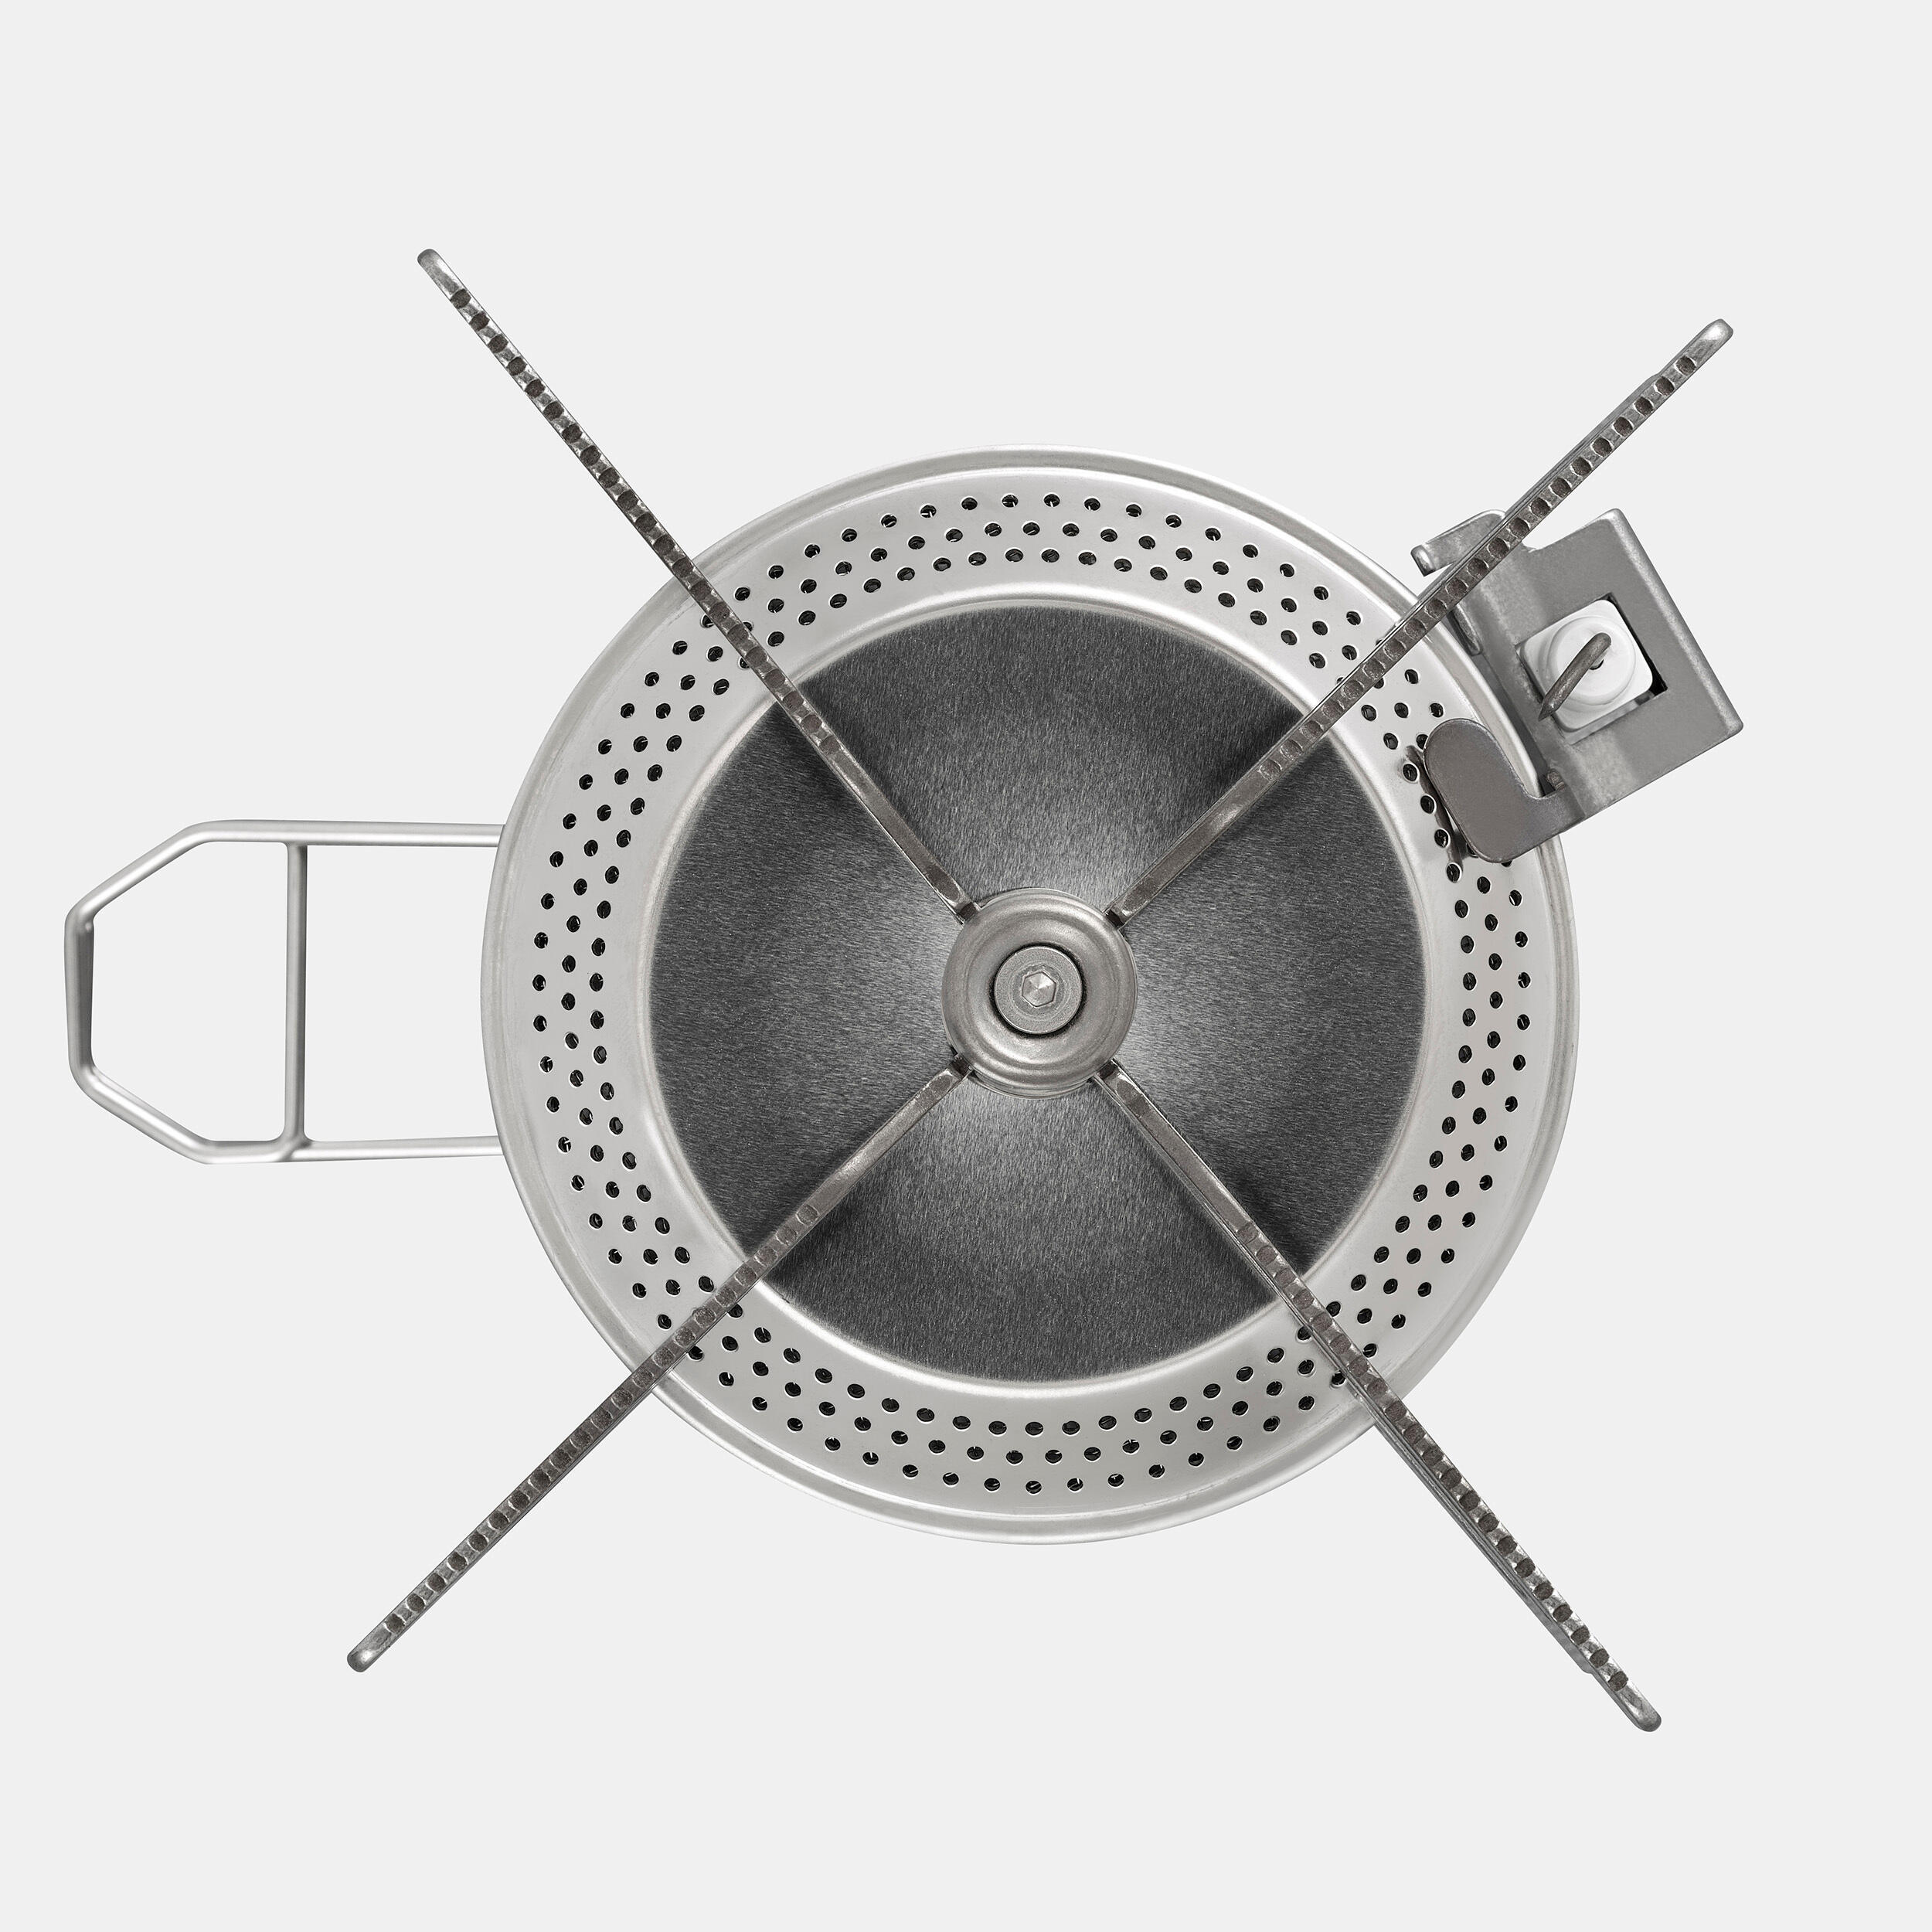 Gas stove with lighter - MT100 5/8